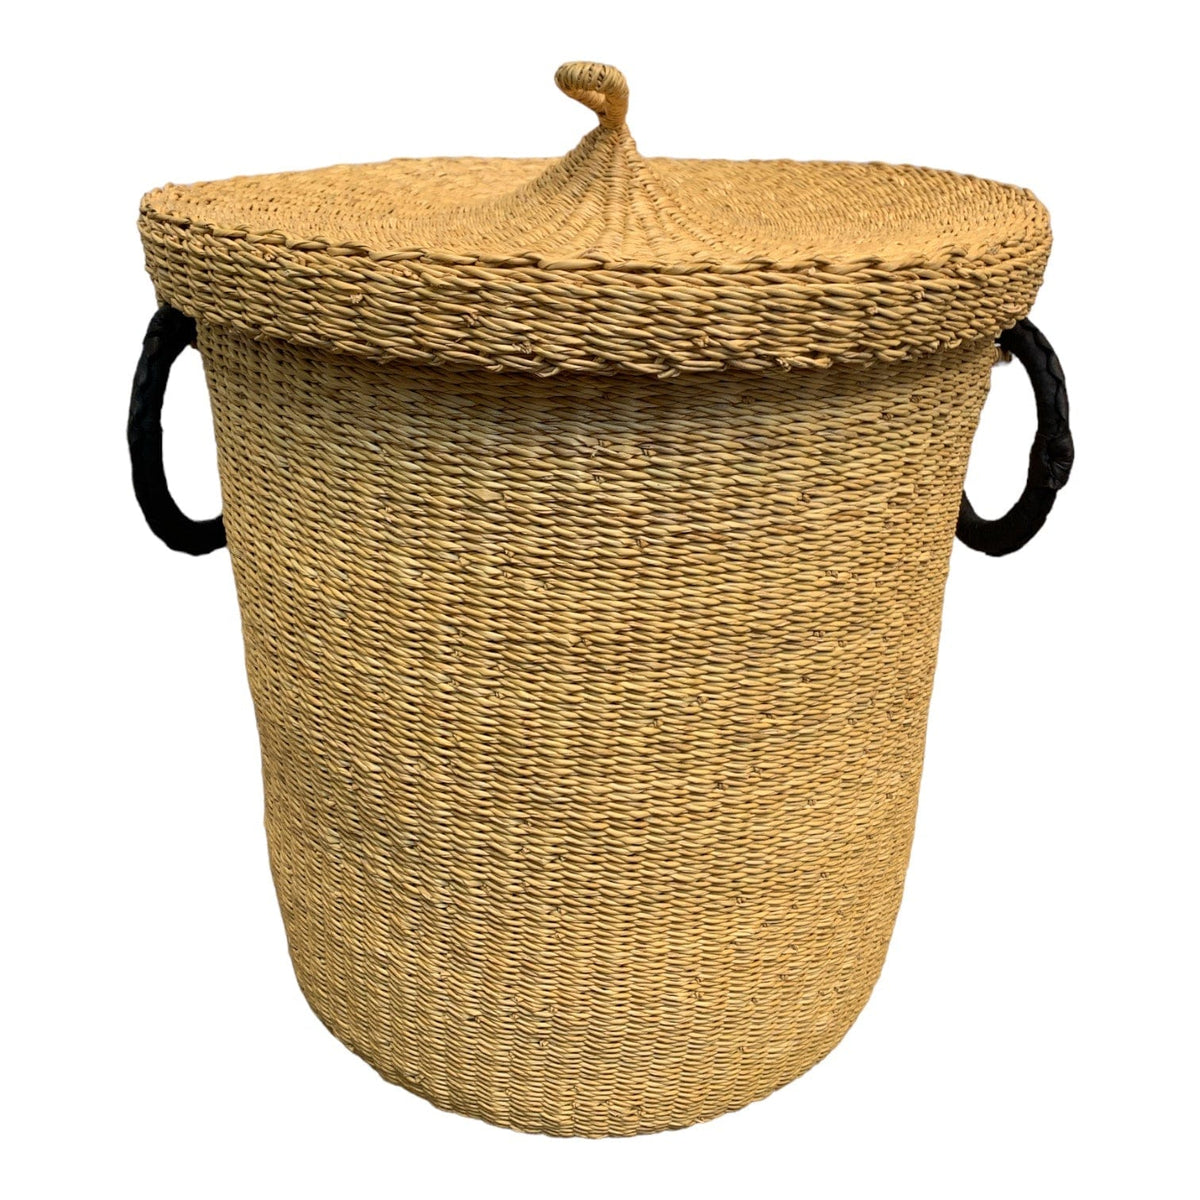 Woven-Natural-Small-Basket-with-Lid Little & Fox